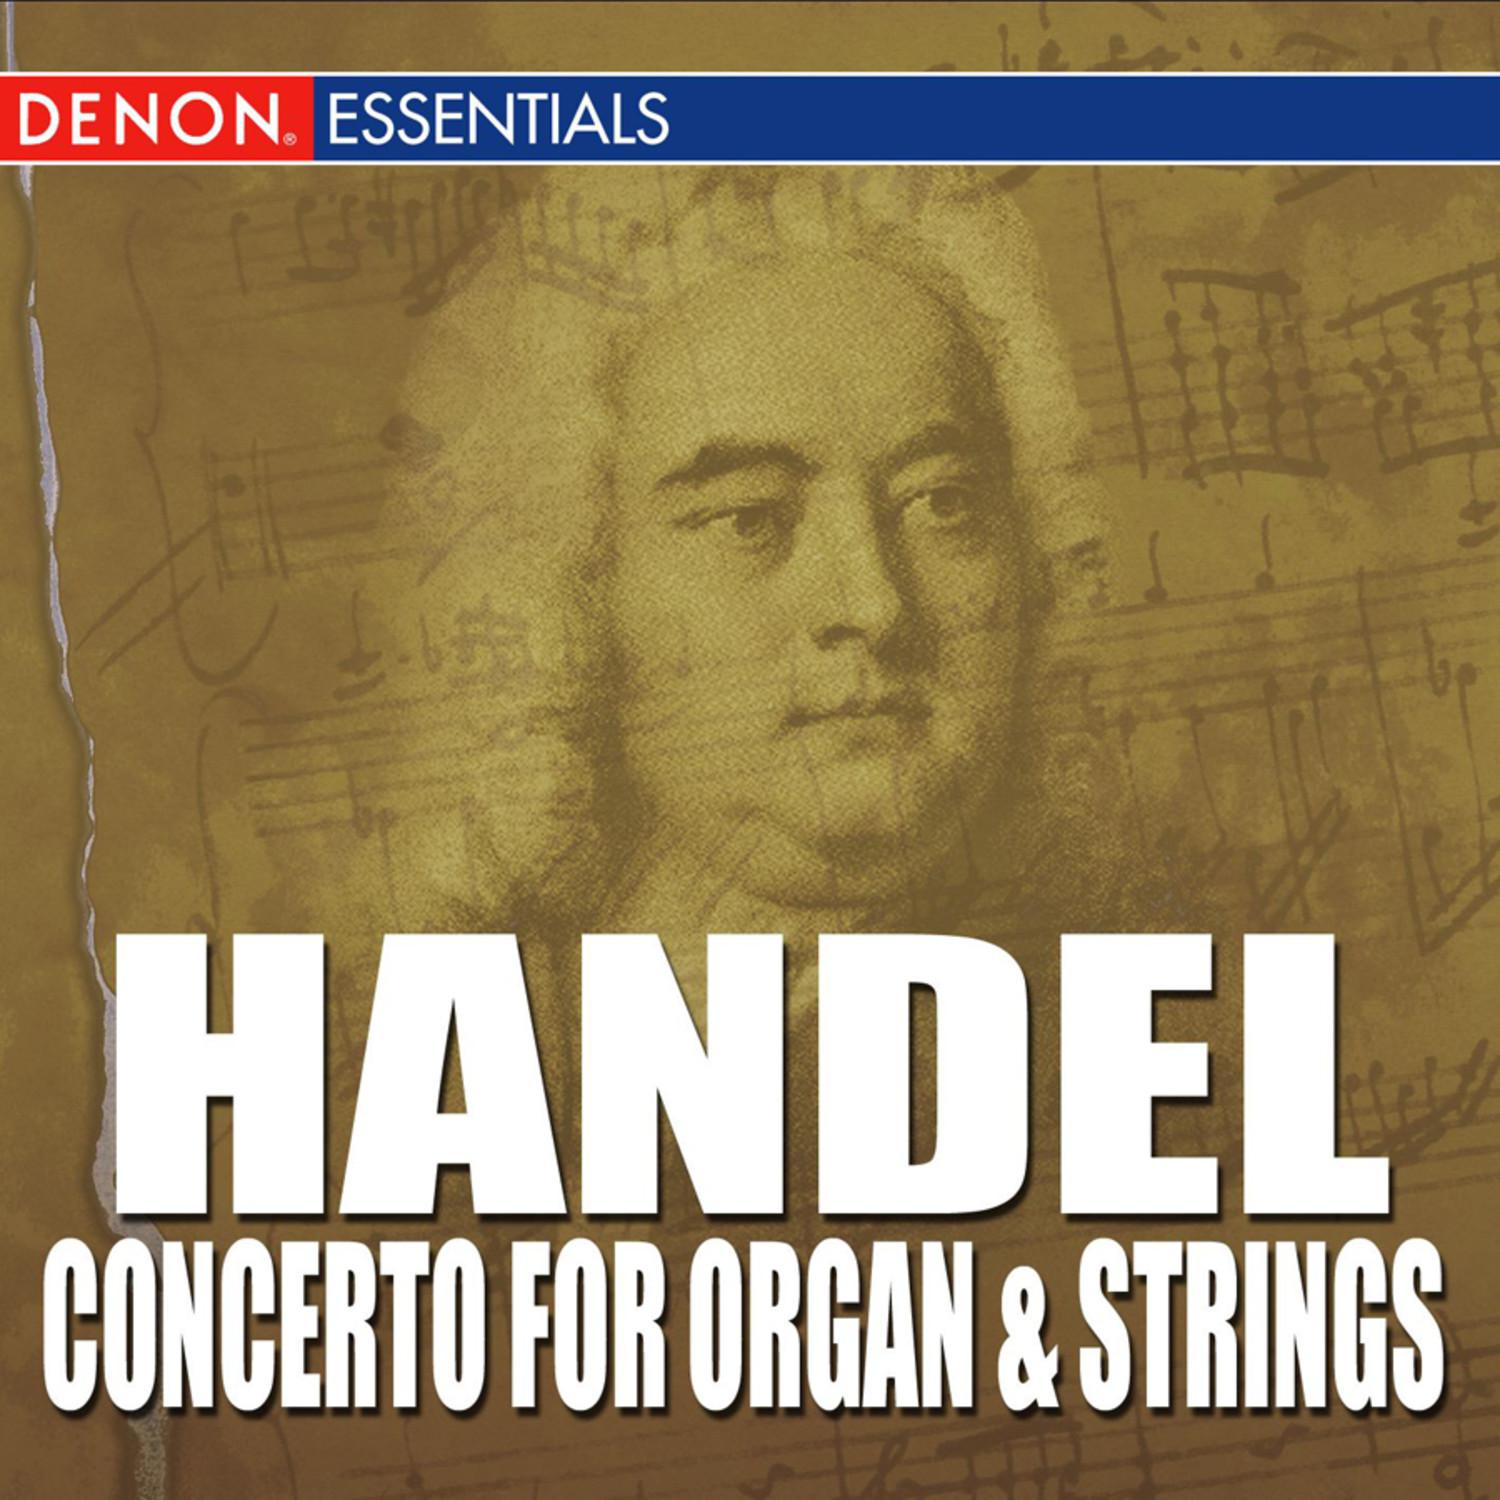 Concerto for Organ and Orchestra in F Major, Op. 4, No. 13: III. Larghetto